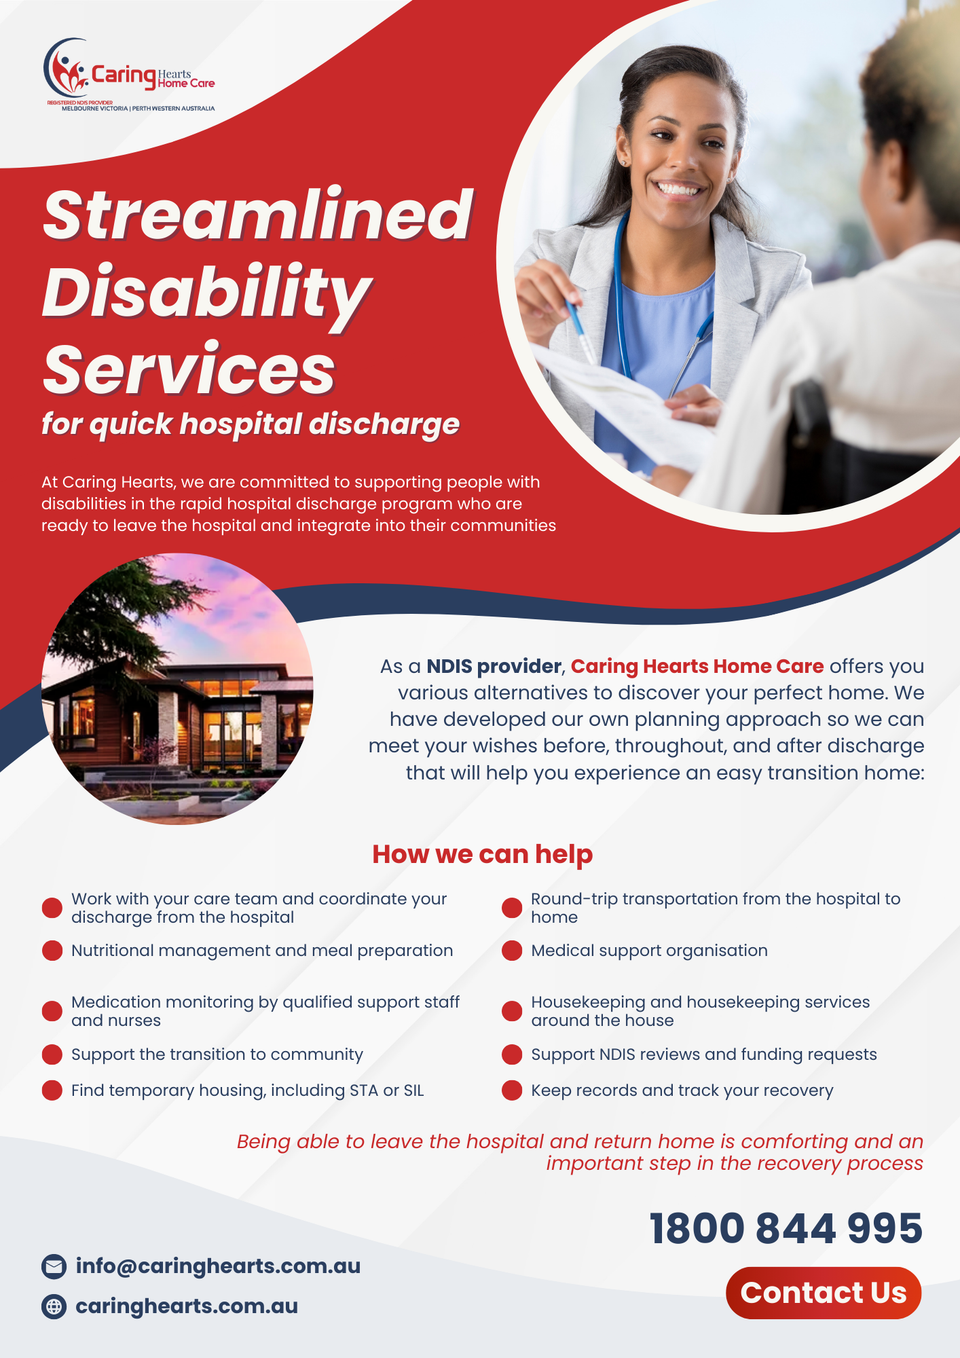 Caring Hearts NDIS Streamlined Disability Services for quick hospital discharge Melbourne